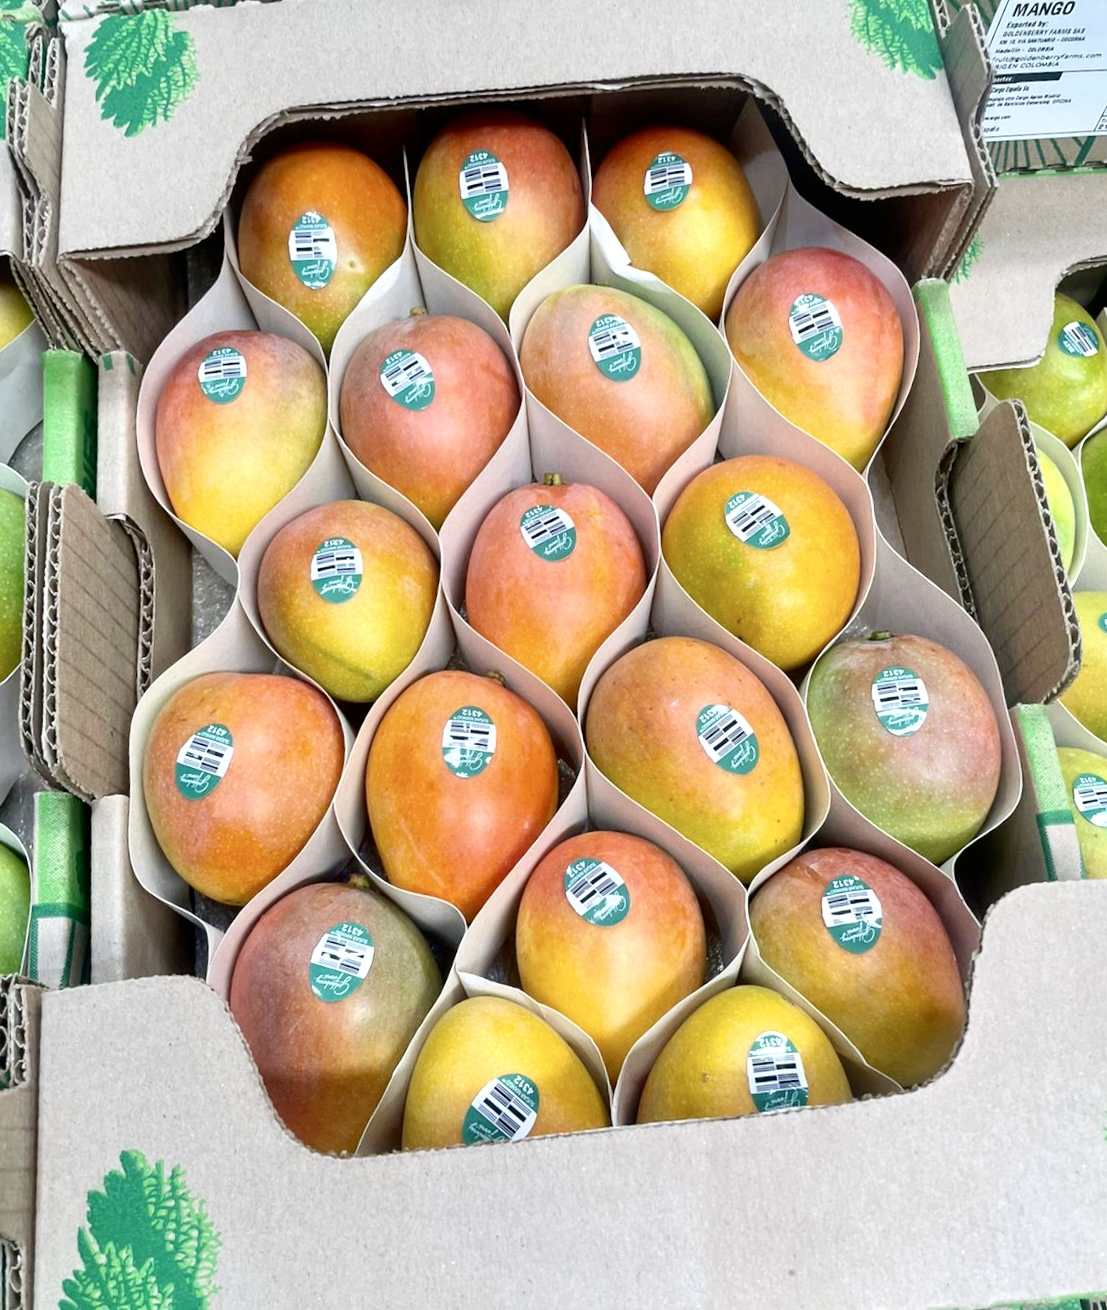 Sugar Mangos ™ are grown and exported exclusively by Goldenberry Farms and its authorized licensees Image